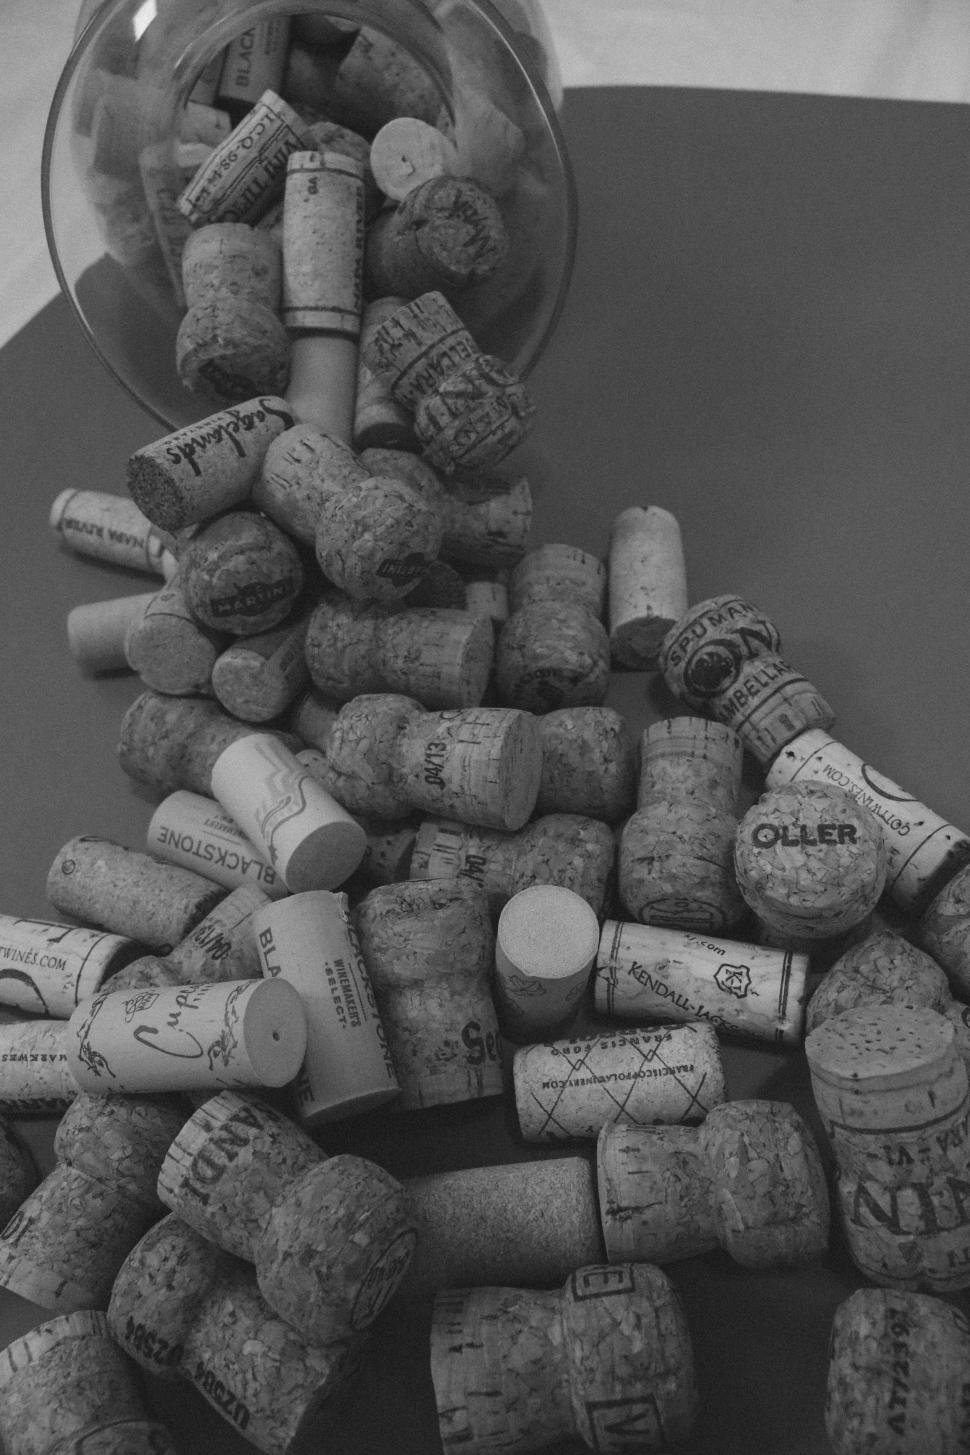 Free Image of Wine corks and glass vase  